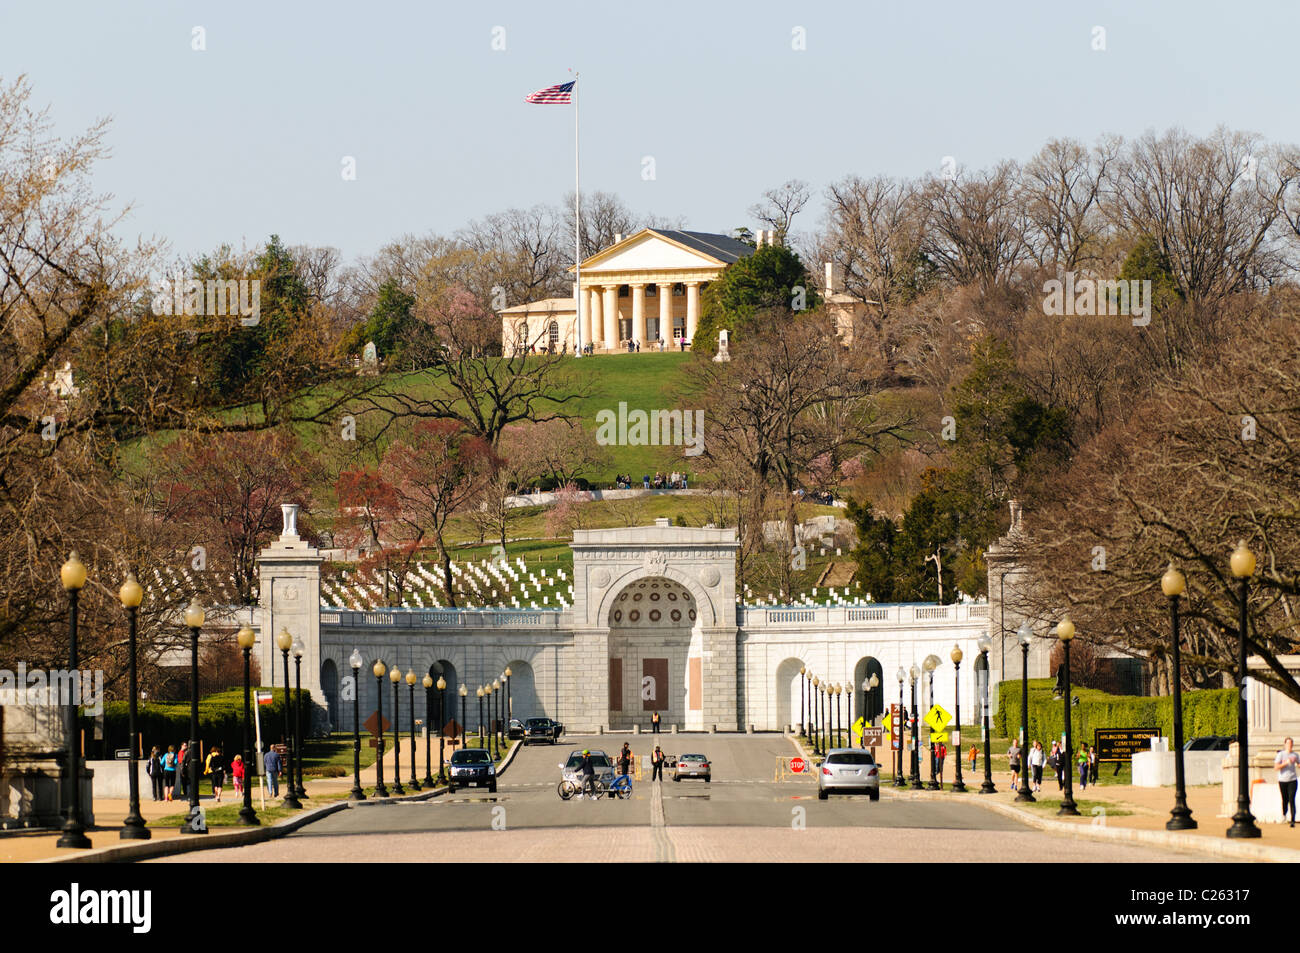 Arlington House, also known as the Robert E. Lee Memorial on top of the hill of Arlington National Cemetery. The shot is taken from Memorial Bridge looking west. In the foreground is the entrance of the cemetery with the John F. Kennedy gravesite directly behind that. Stock Photo